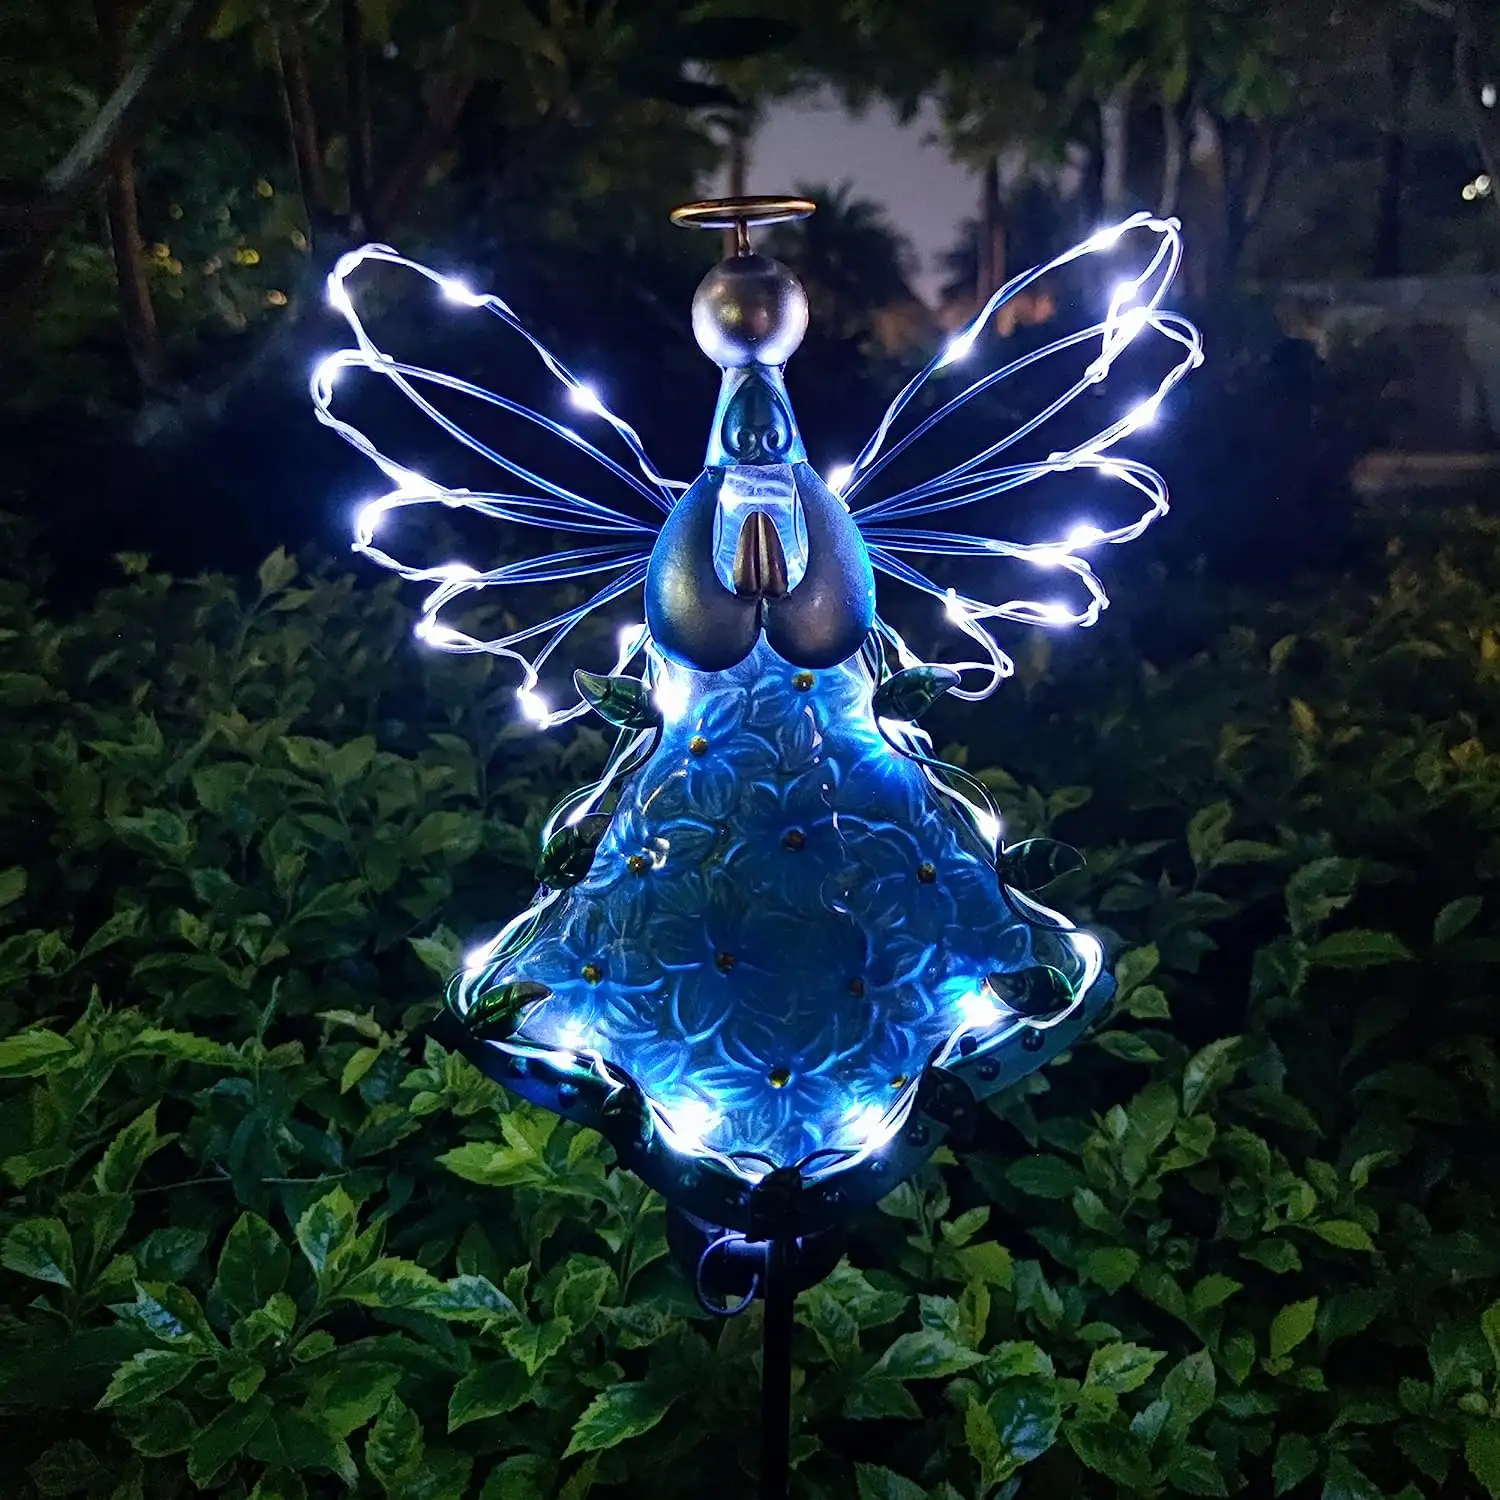 Amazon Hot Selling Glass Metal Yard Stake Solar Metal Fairy Stake Solar Stake Light For Outdoor Garden